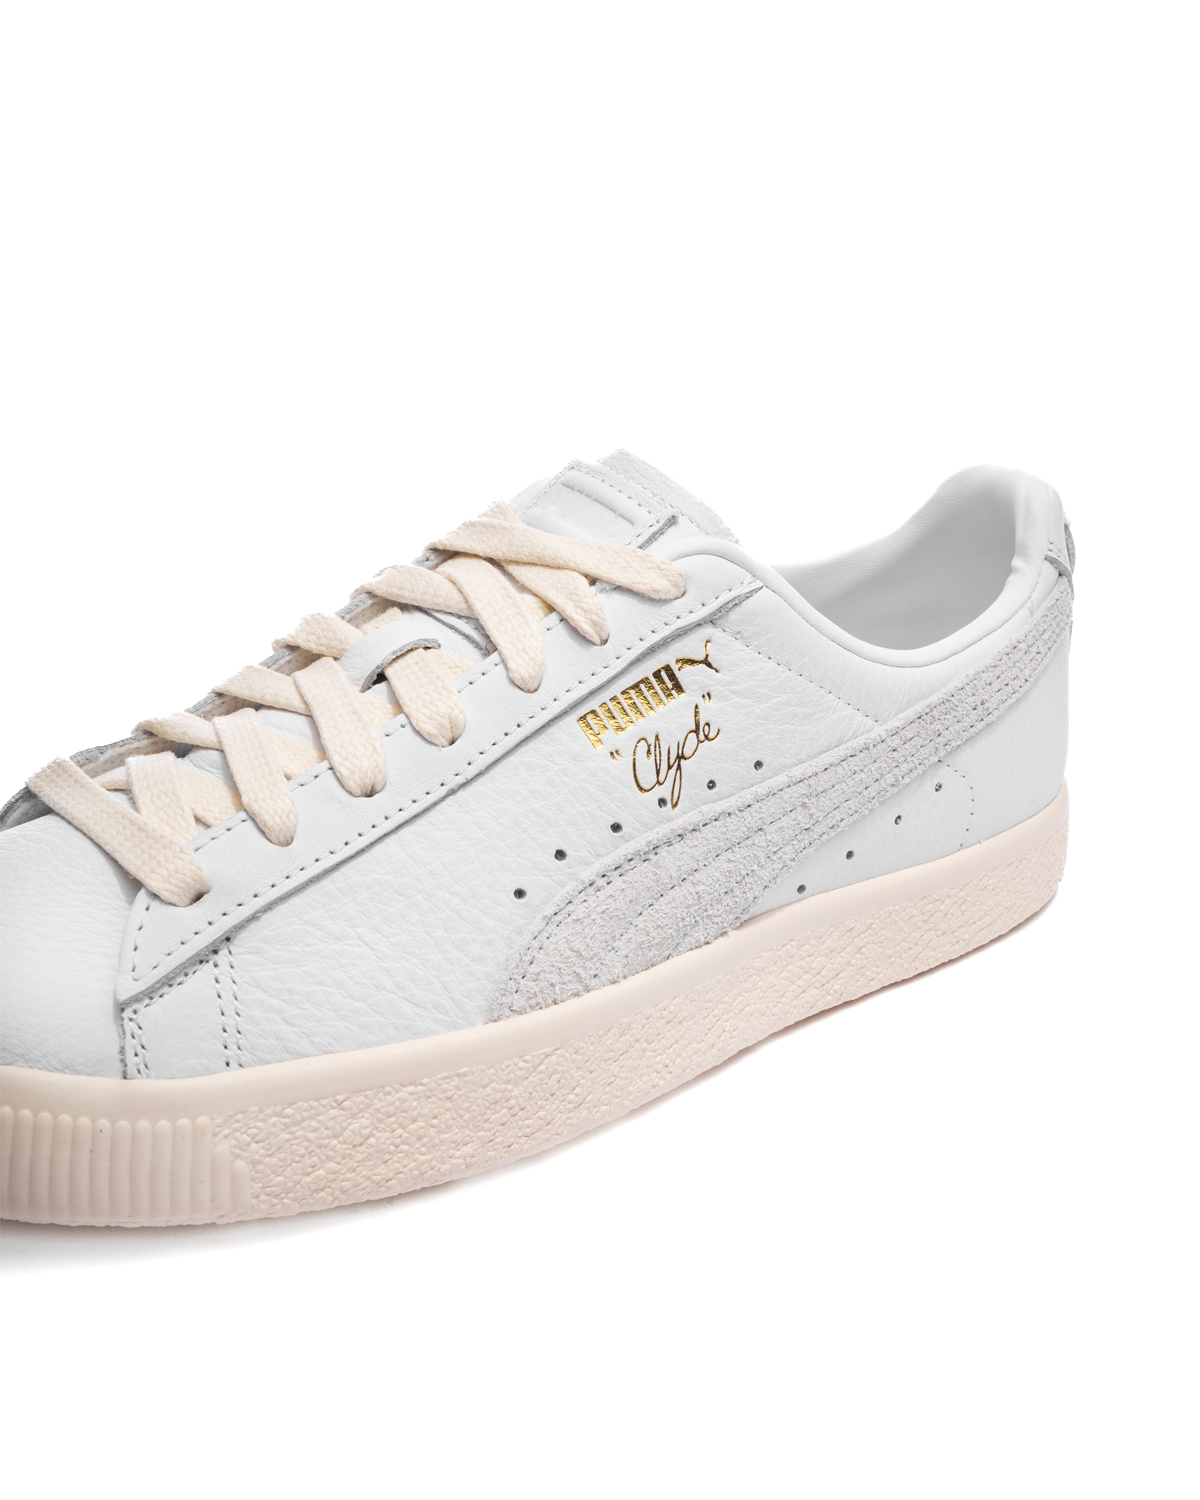 Clyde Base Puma White/Frosted Ivory/Puma Team Gold